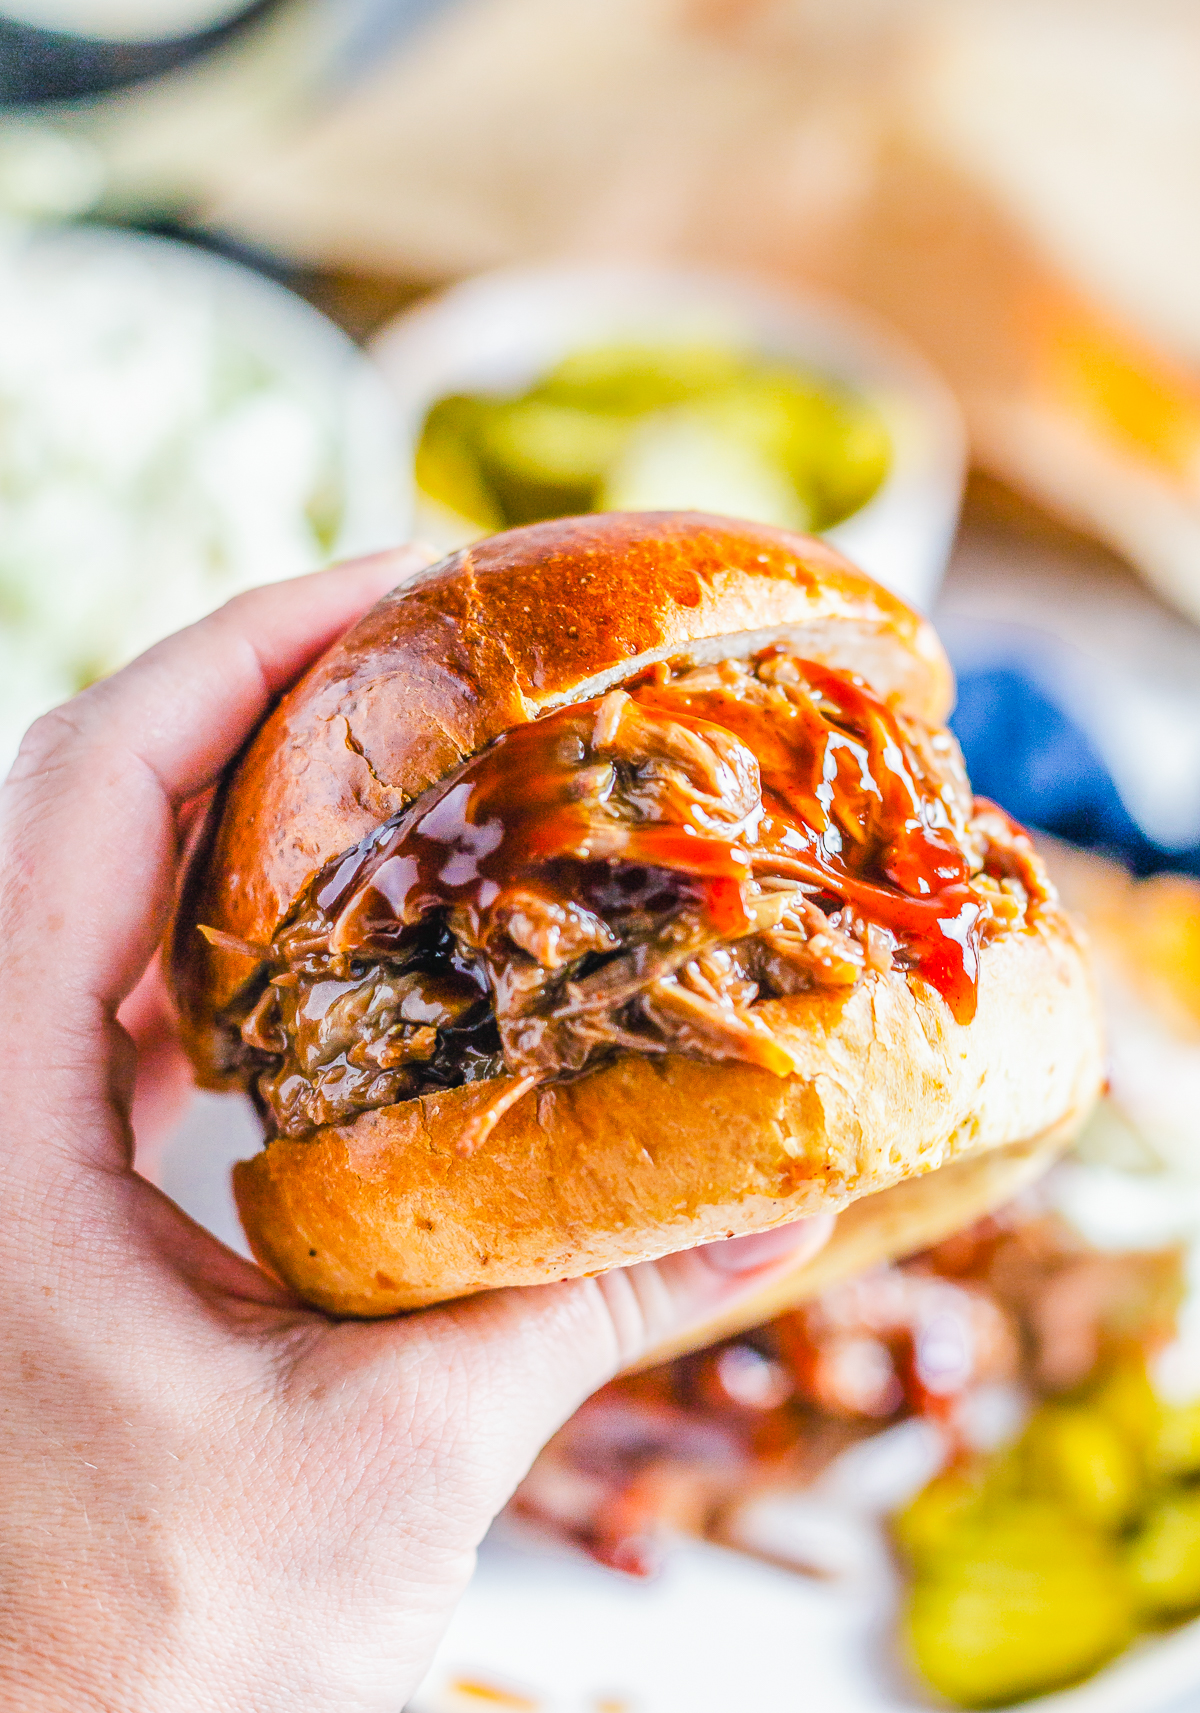 BBQ Beef Sandwich being held in hand showing meat and BBQ saucce.